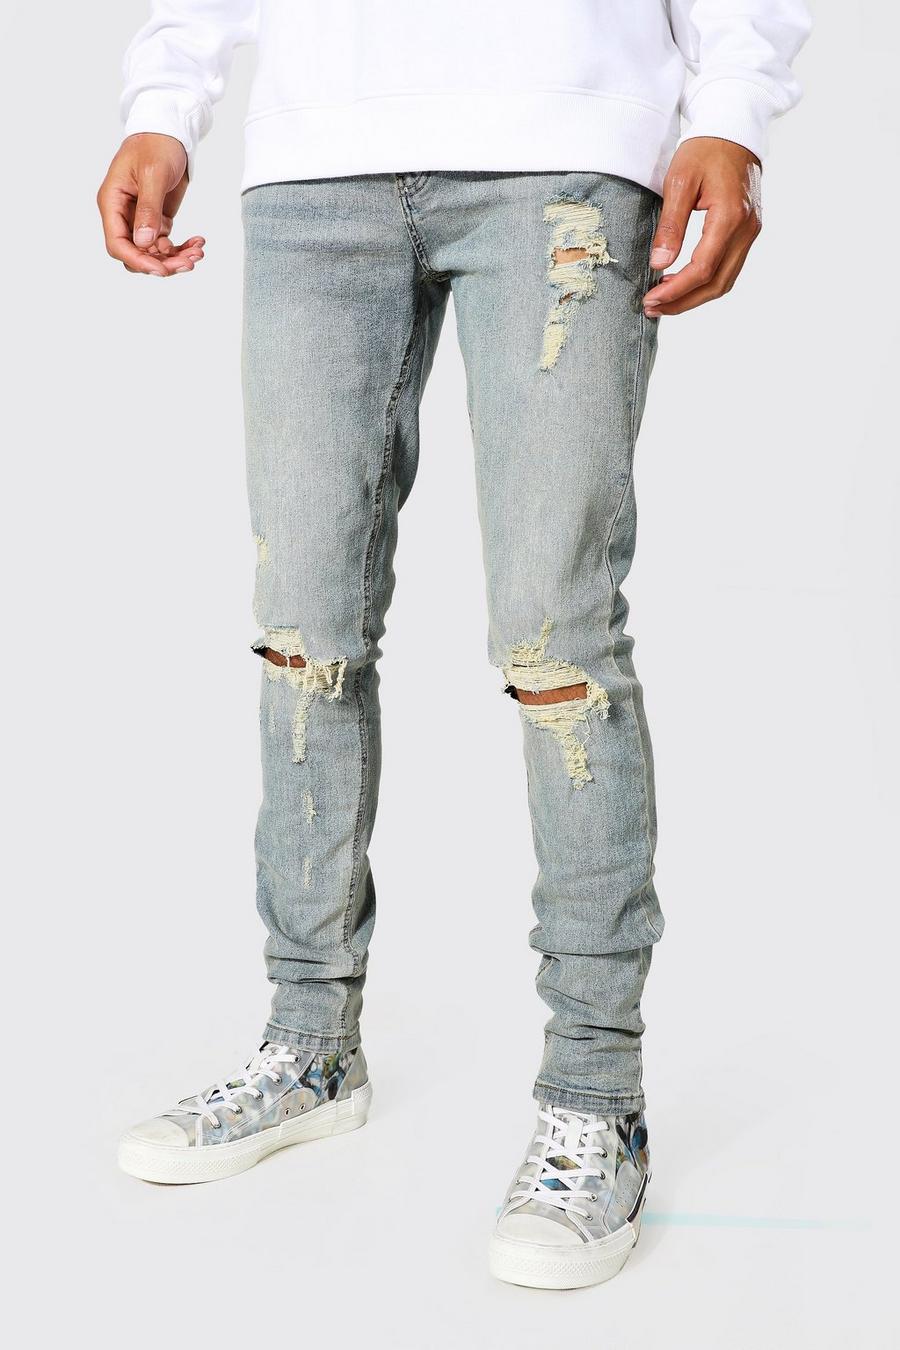 Jeans Tall Skinny Fit a effetto consumato con spacco sul ginocchio, Antique blue image number 1